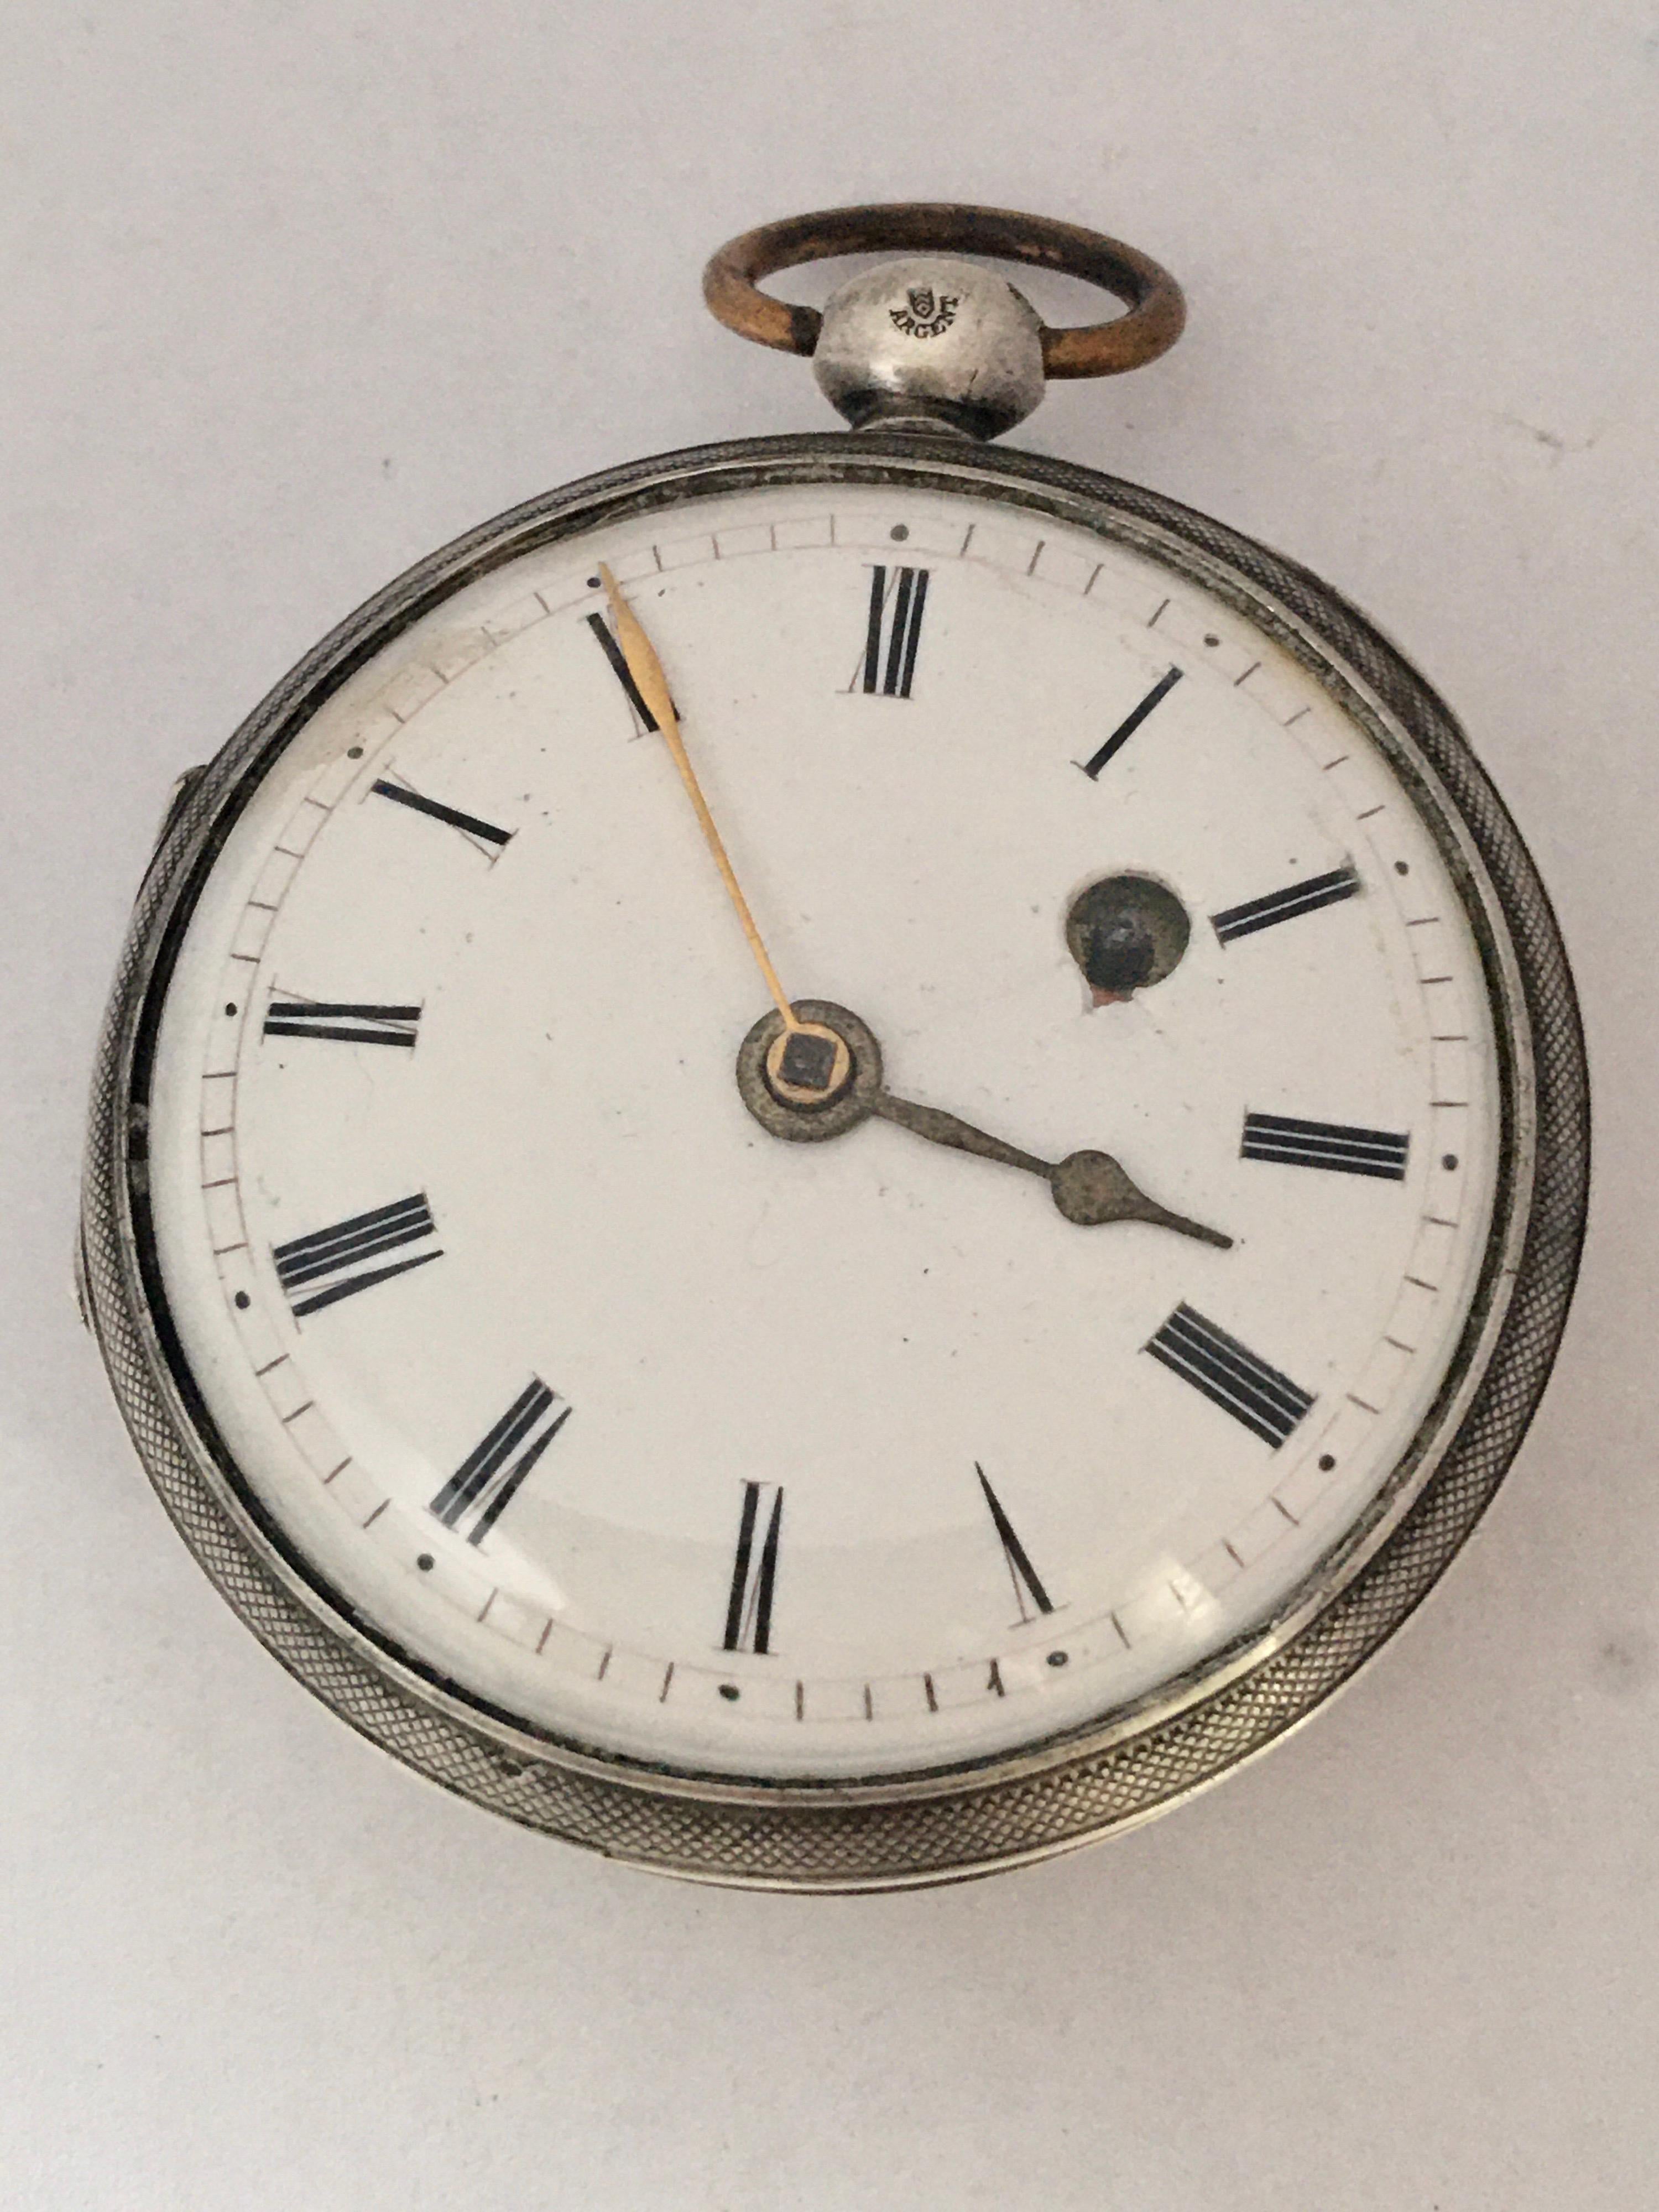 Early Rare Verge Fusee Silver Pocket Early rare Verge Fusee Silver Pocket Watch.

This beautiful 46mm diameter watch is working and ticking well but I cannot guarantee the time accuracy. It’s a bit fast. Visible signs of ageing and wear with